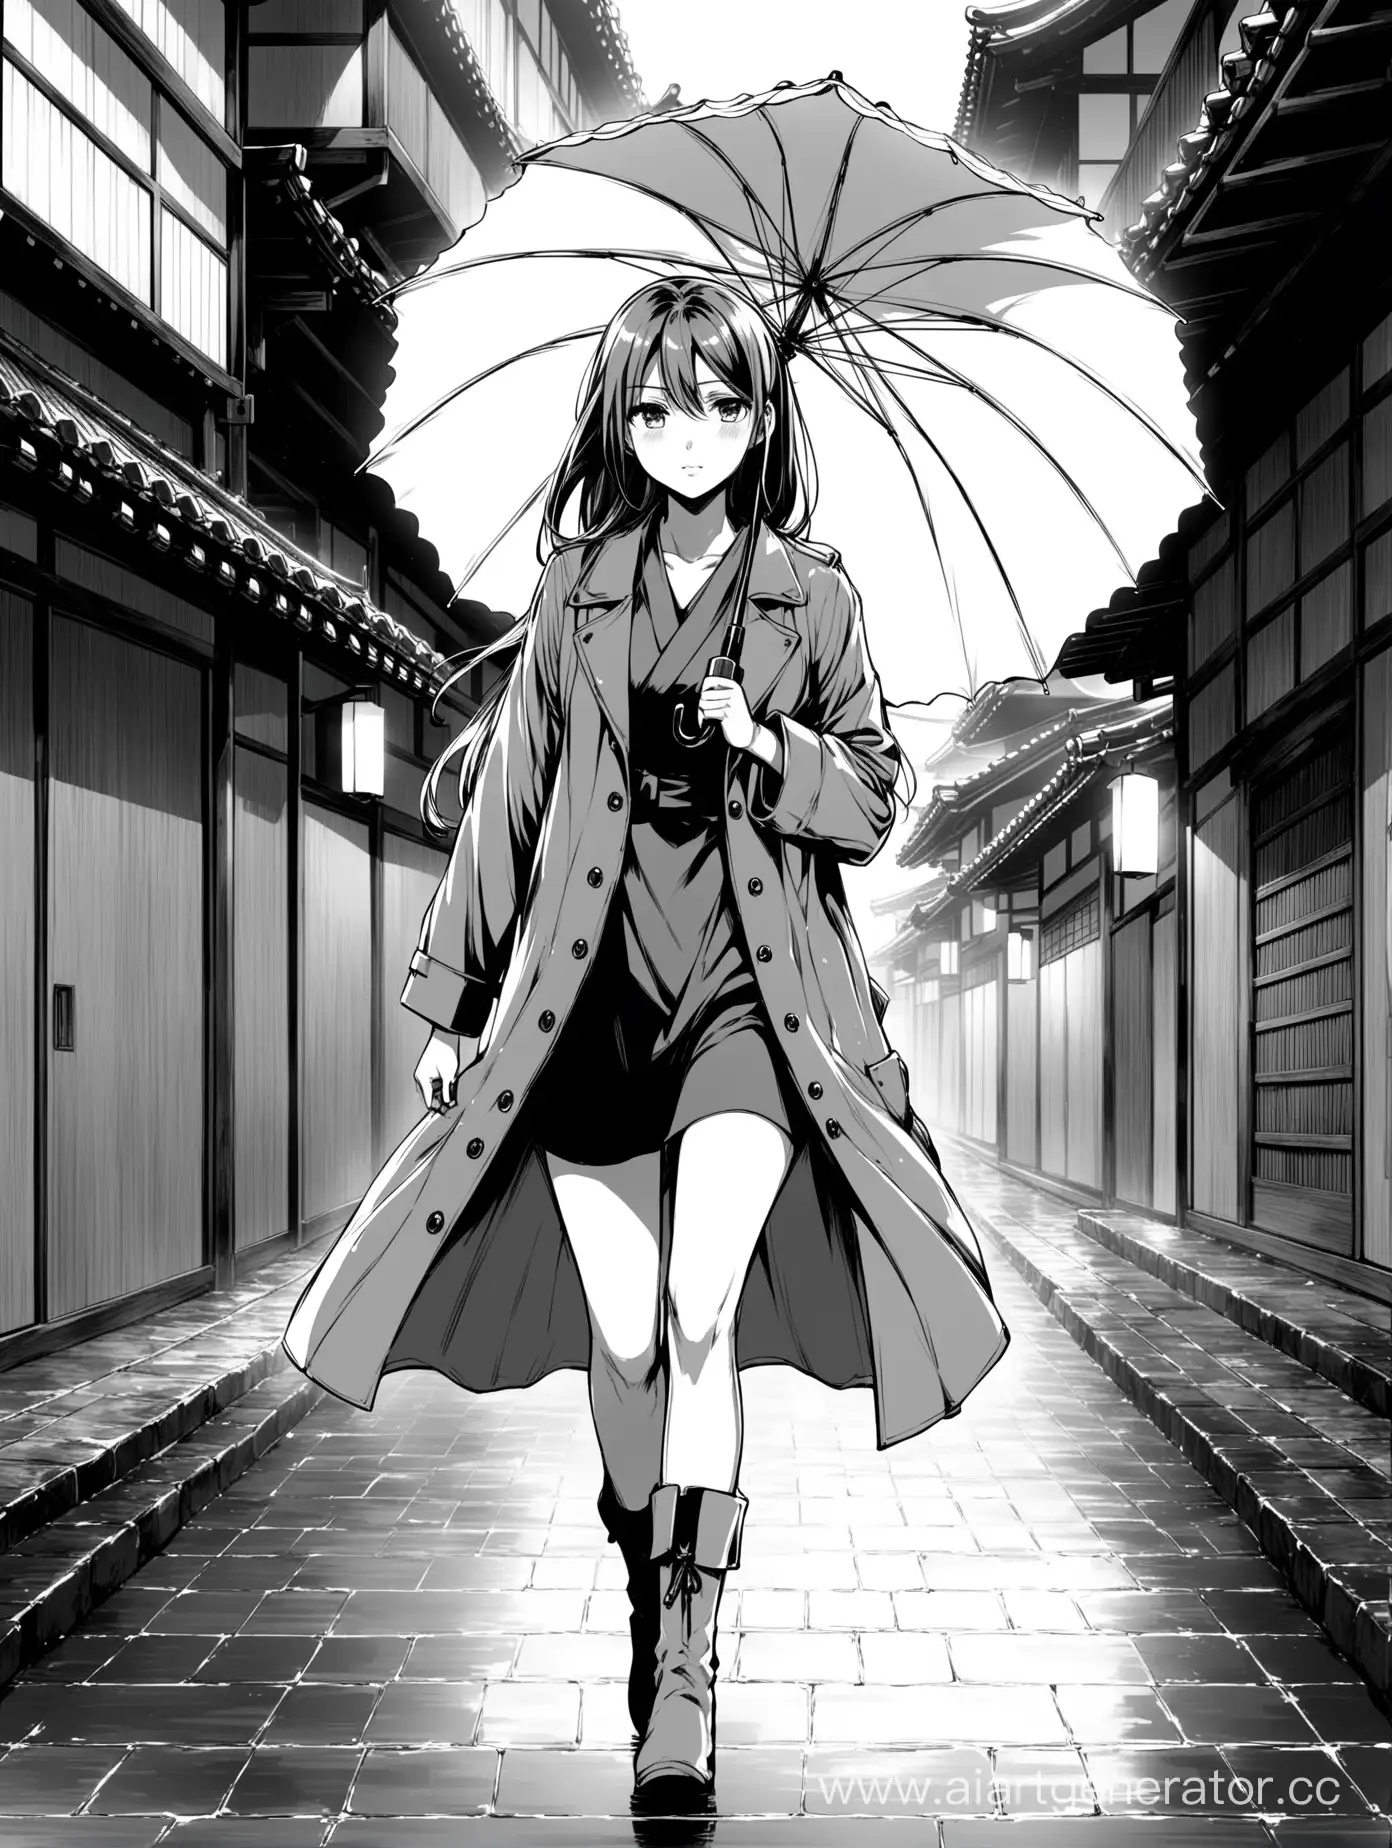 A girl, long jacket, boots. Walking. Umbrella. Colorless. Japan anime style